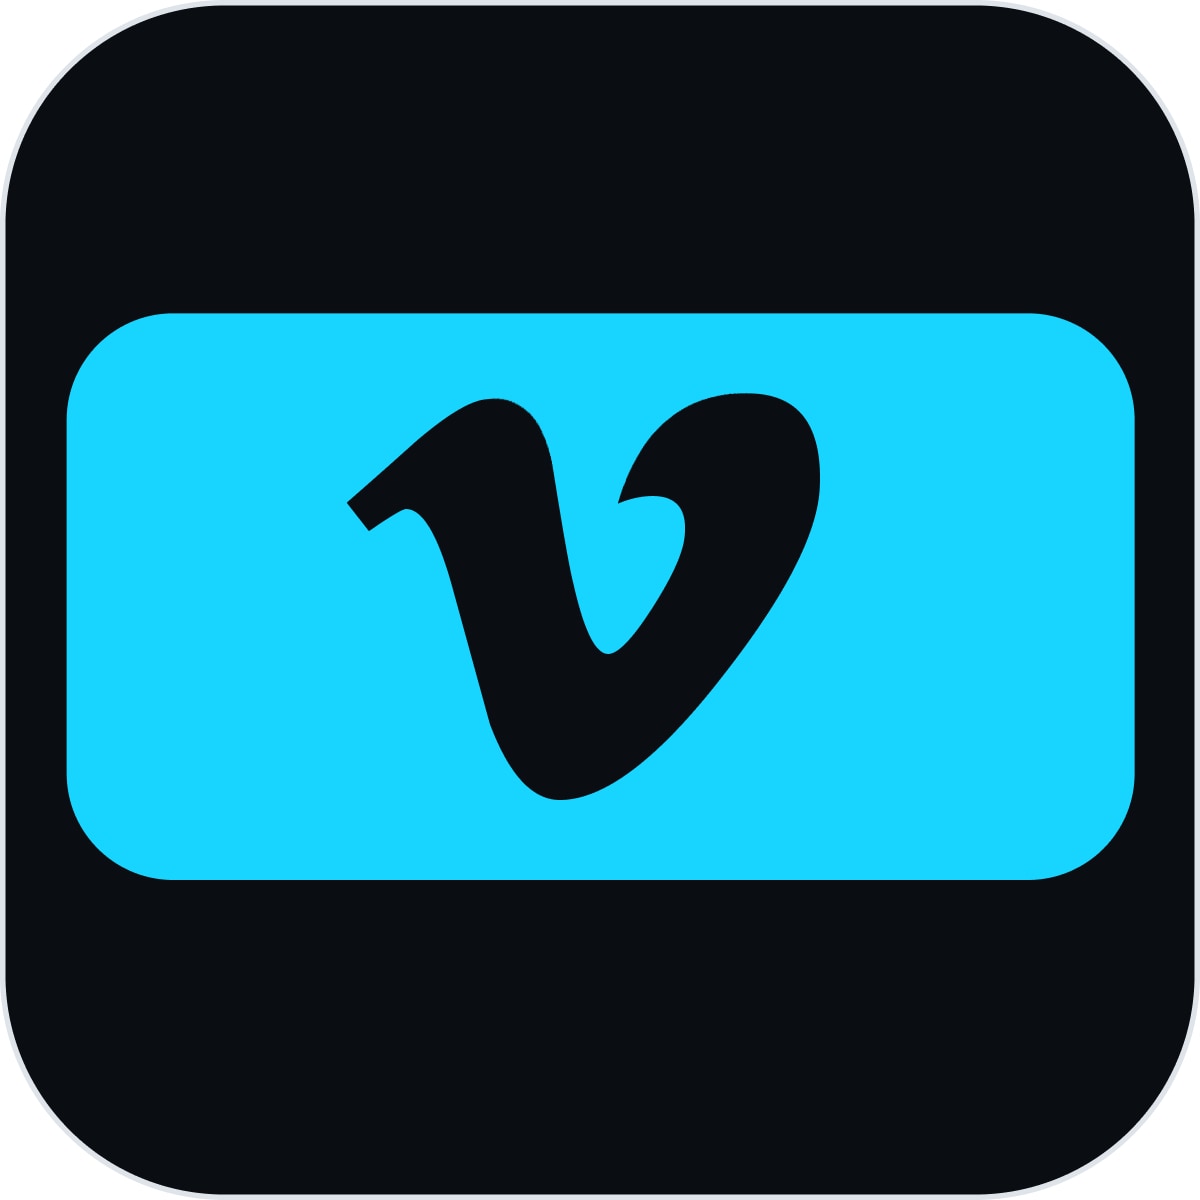 VIMEO EVENTS AND LIVE STREAMING